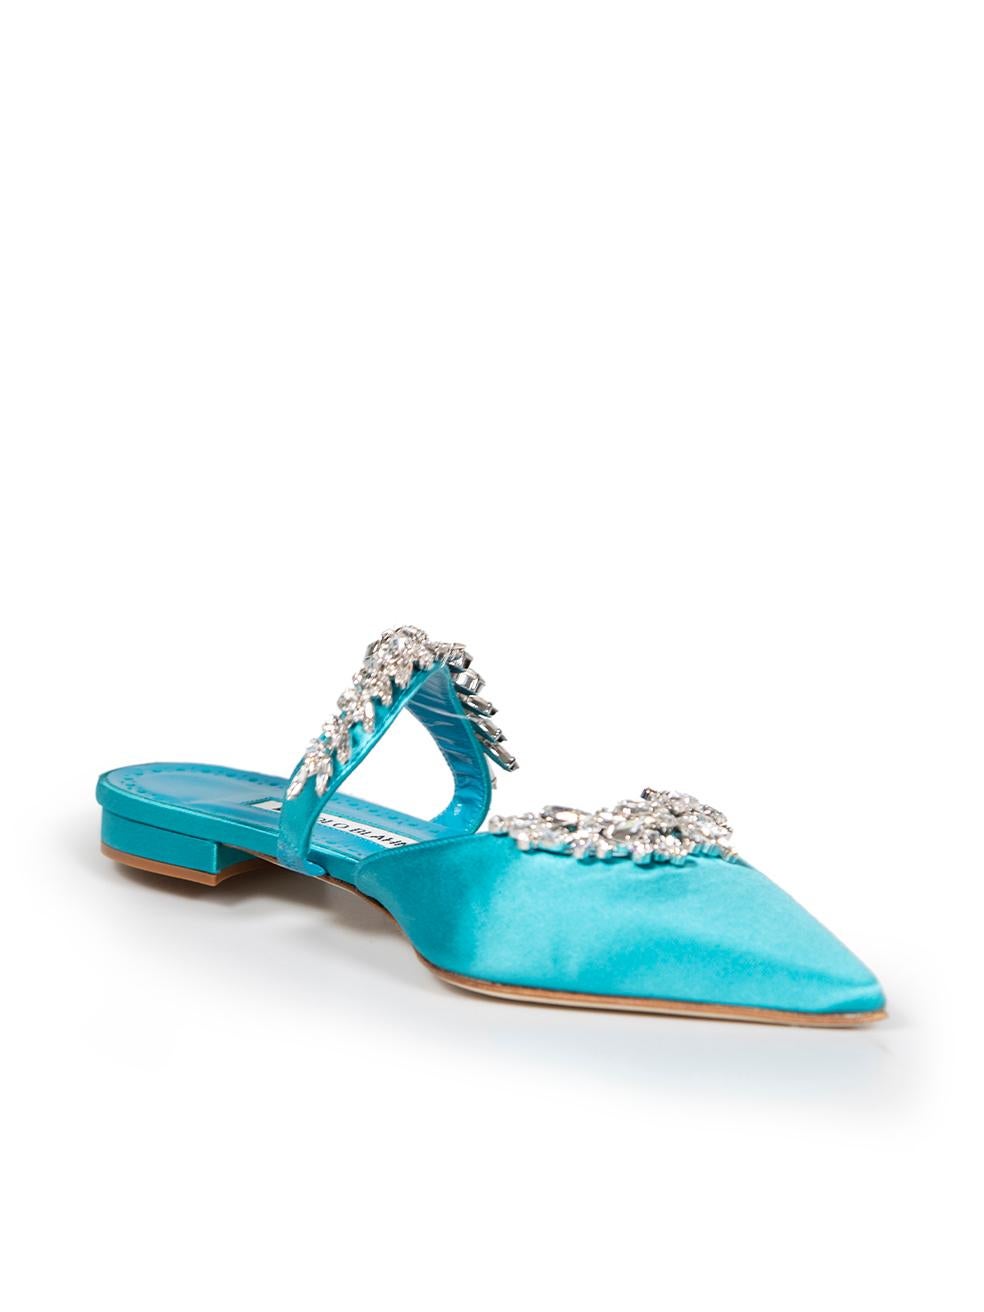 CONDITION is Very good. Minimal wear to shoes is evident. Minimal wear to soles on this used Monolo Blahnik designer resale item.
 
 
 
 Details
 
 
 Model: Lurum
 
 Turquoise
 
 Satin
 
 Mules
 
 Flat
 
 Point toe
 
 Silver crystal embellished